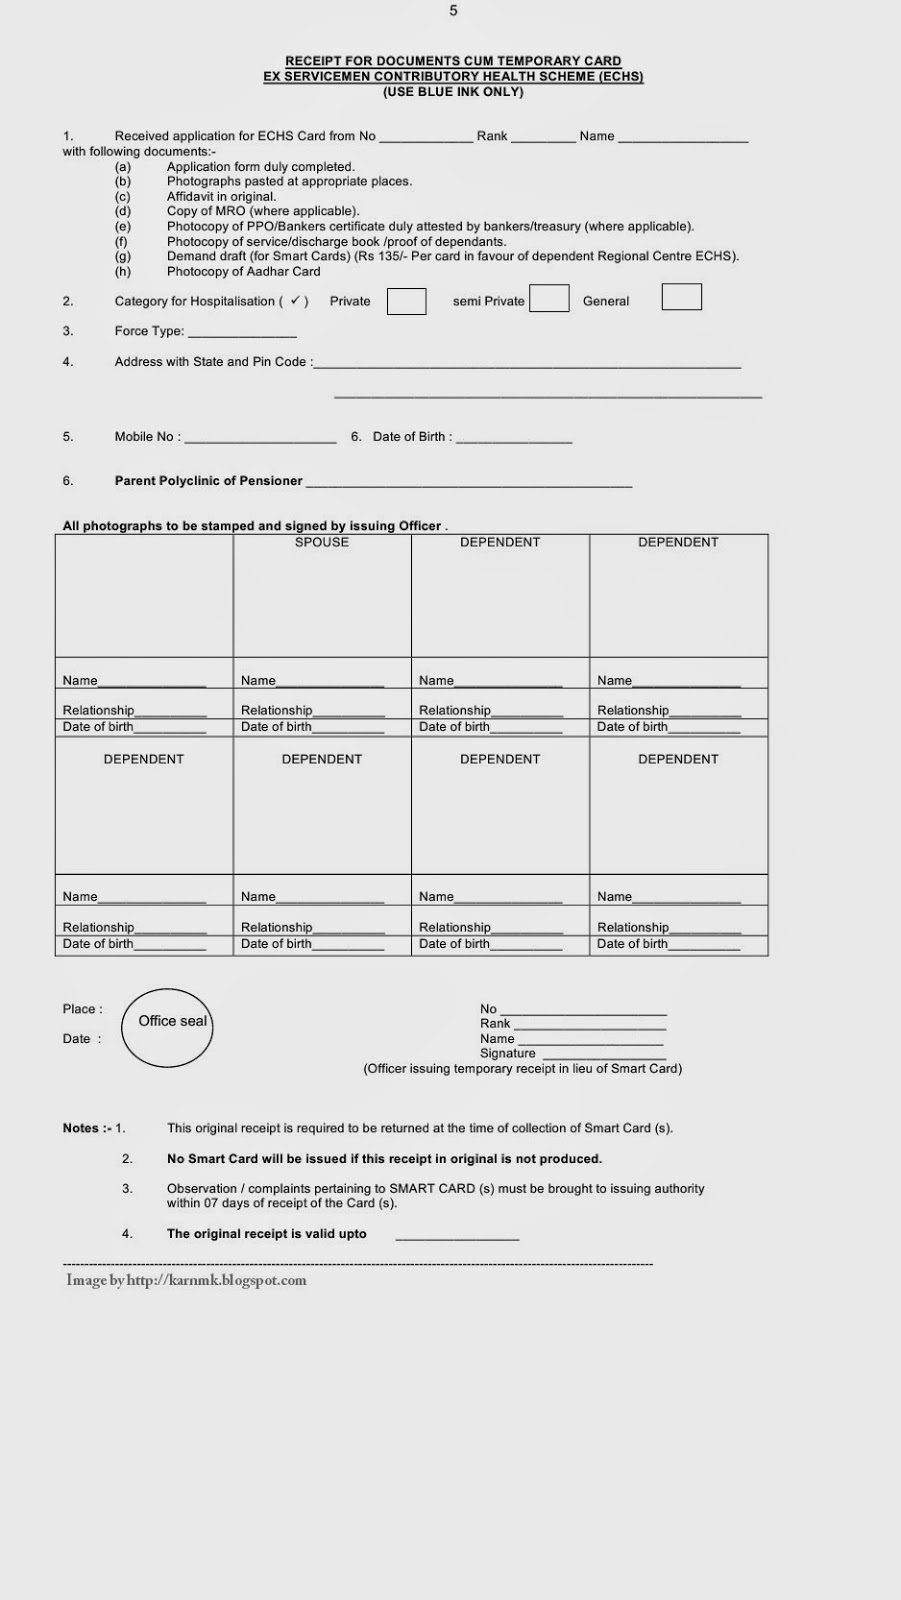 ECHS Revised Application Form - Receipt for Documents cum Temporary ...